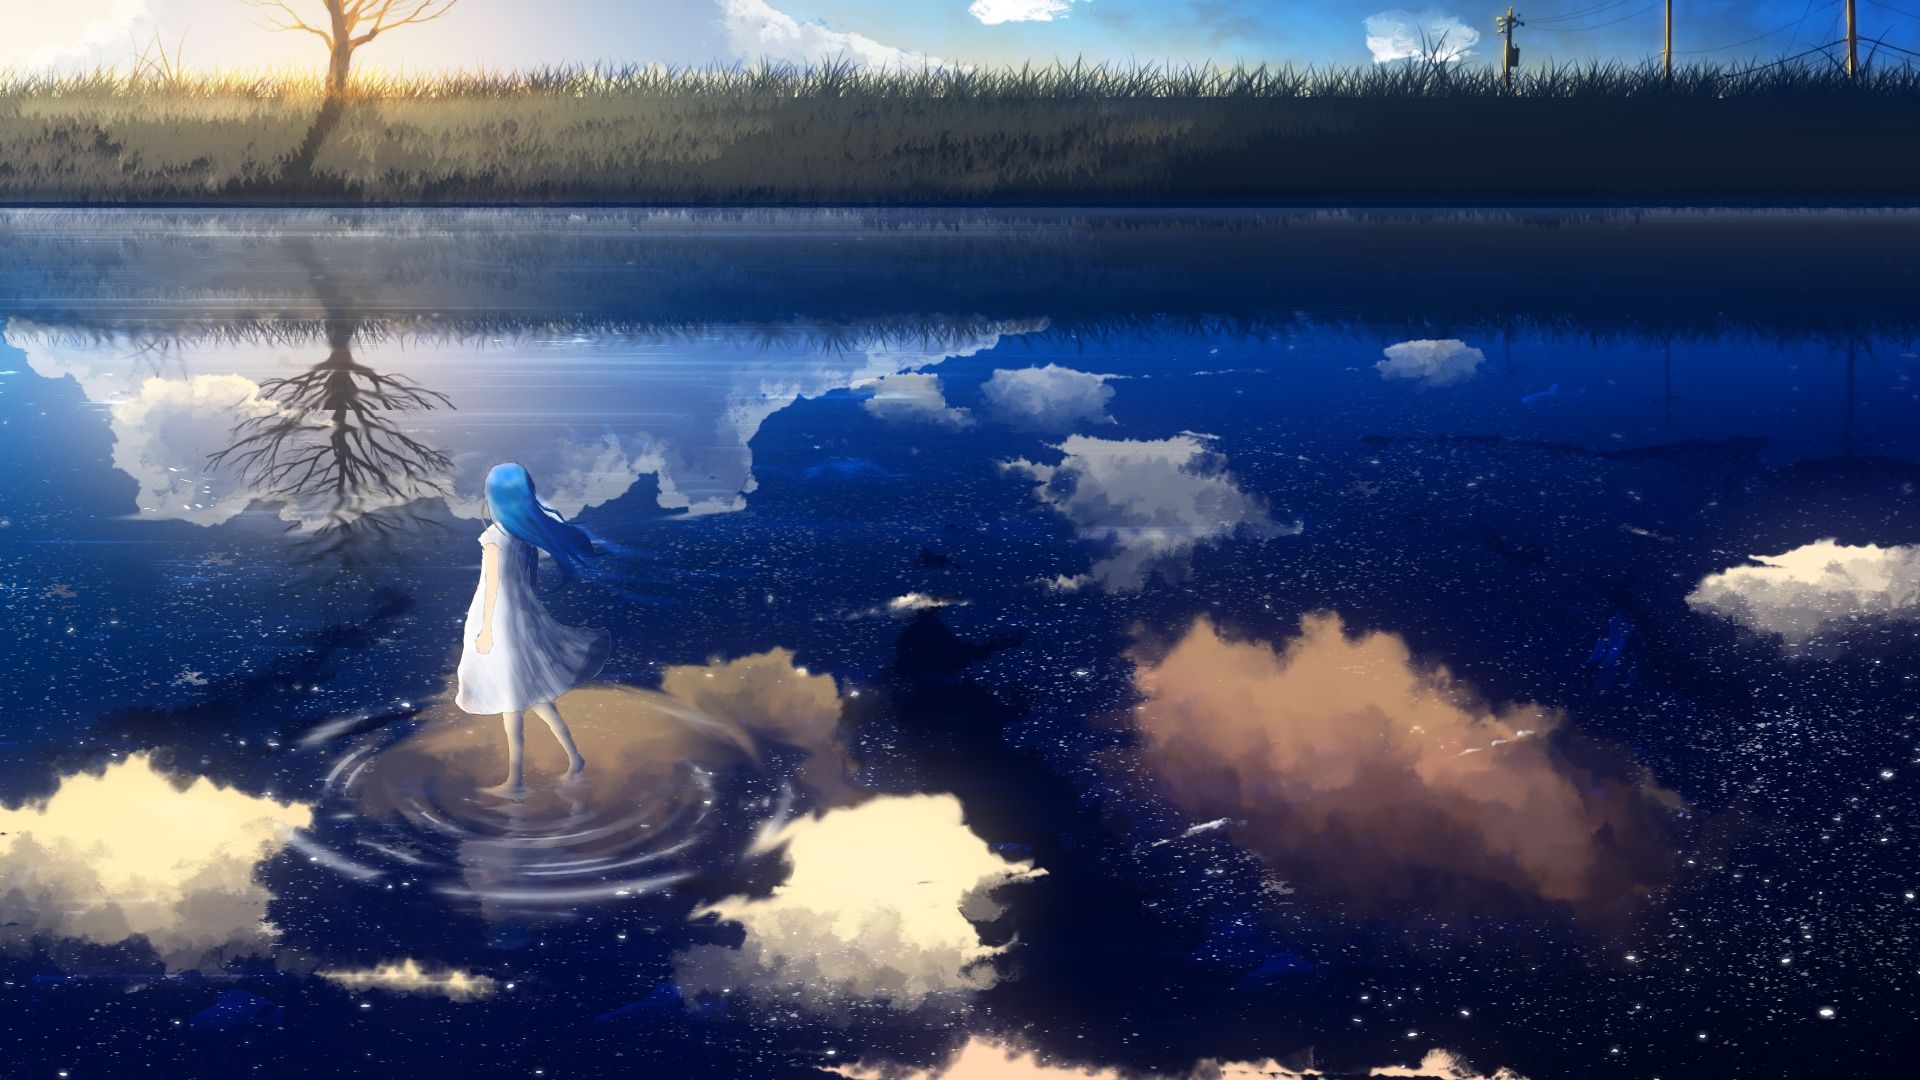 Download 1920x1080 Anime Girl, Walking On Water, Reflection, River